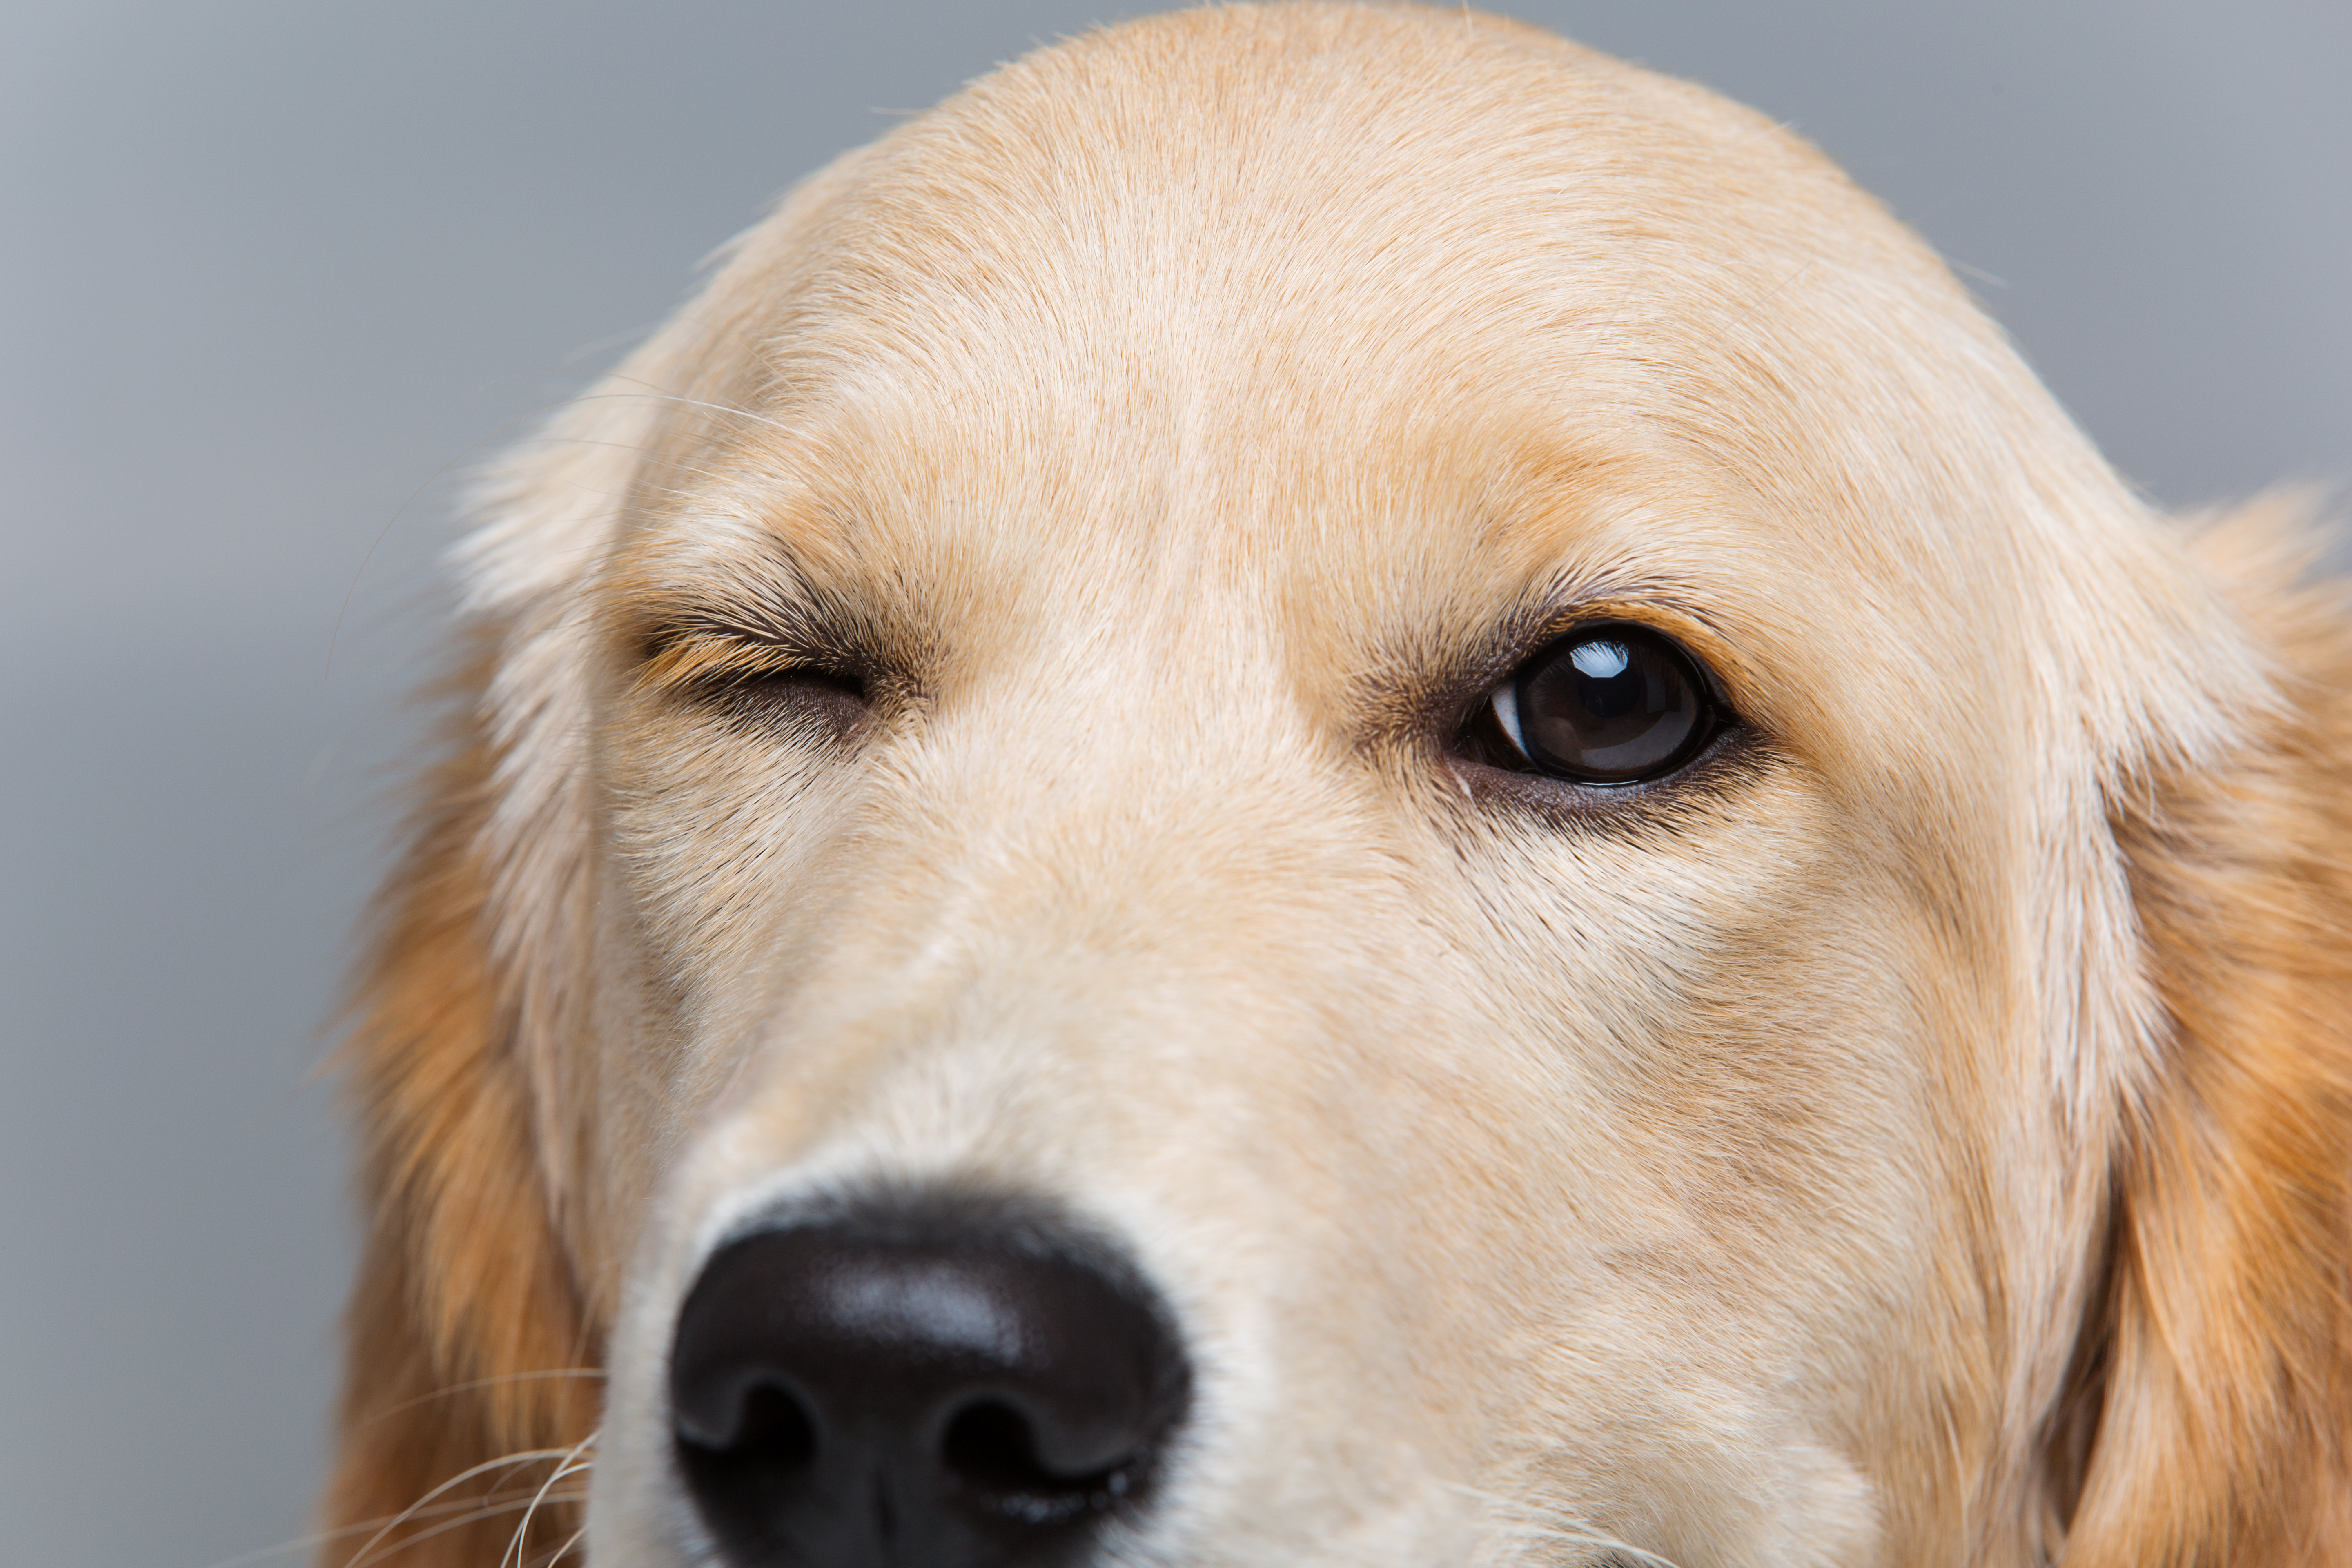 Young beautiul golden retriever dog winking with one eye. Closeup shot. Over grey background.